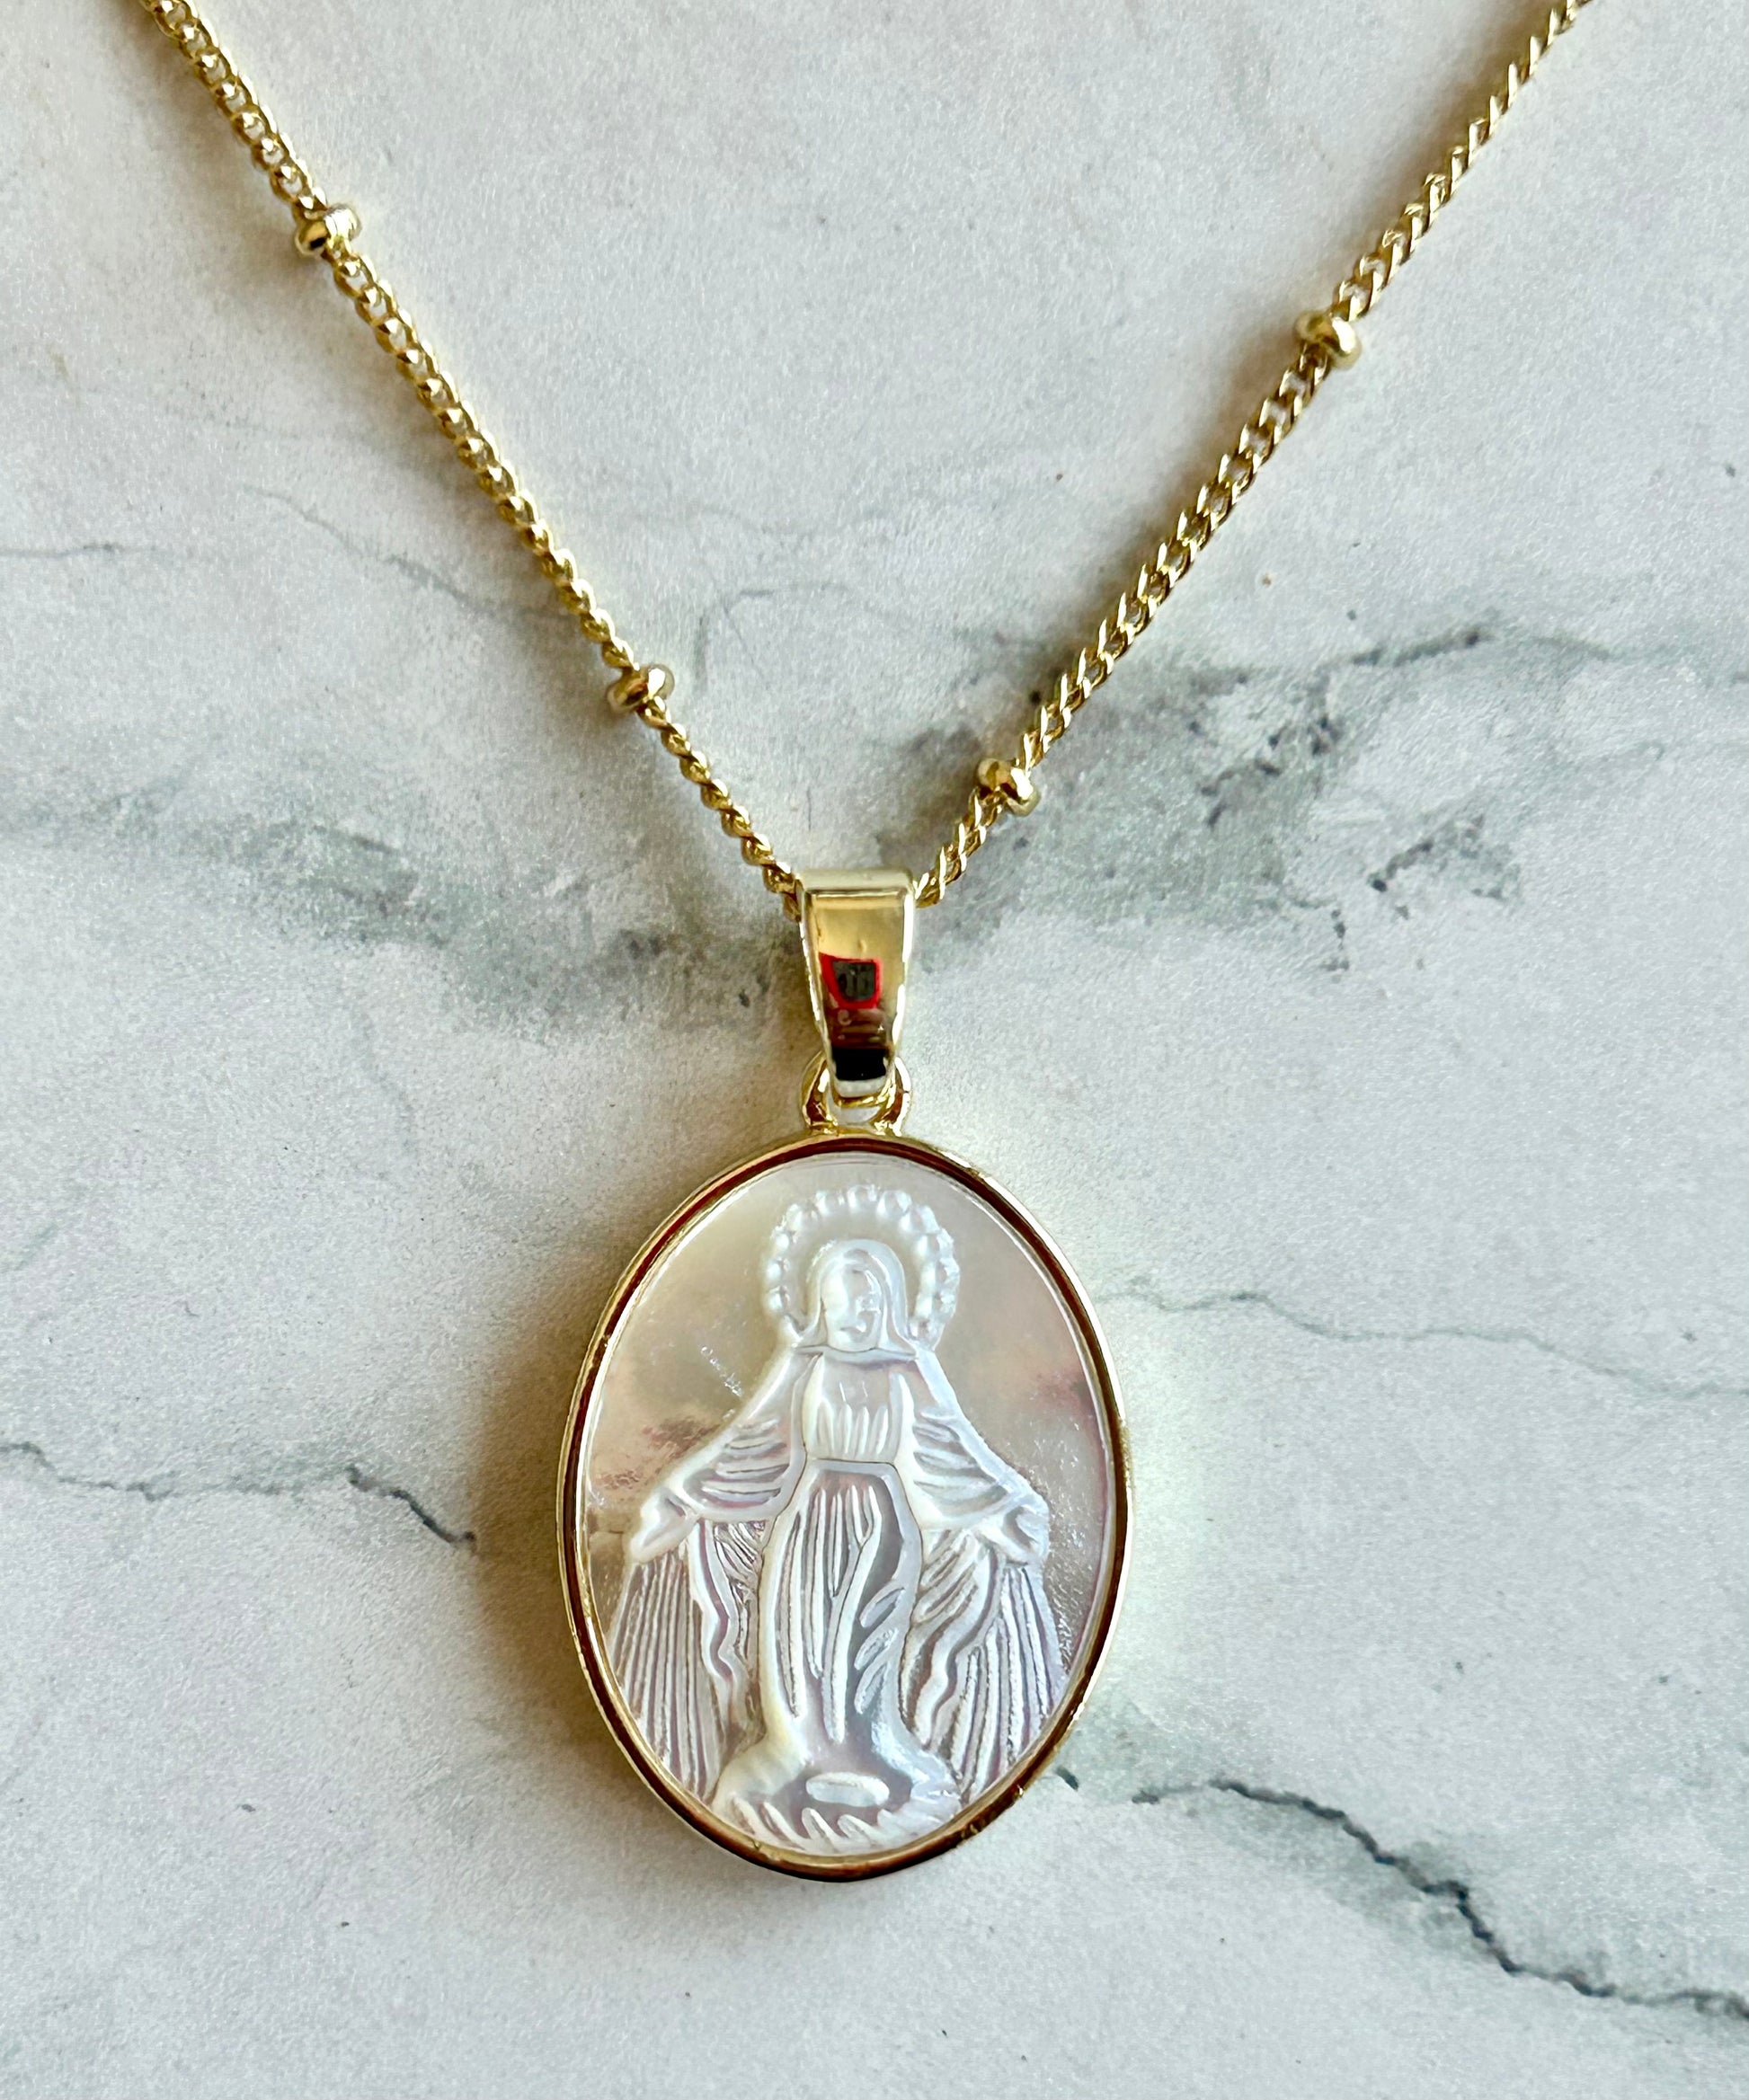 Virgin Mary Pendant Necklace with shell background and  oval shape Virgin Mary Pendant necklace, catholic jewelry, catholic necklace, catholic gifts, catholic gift